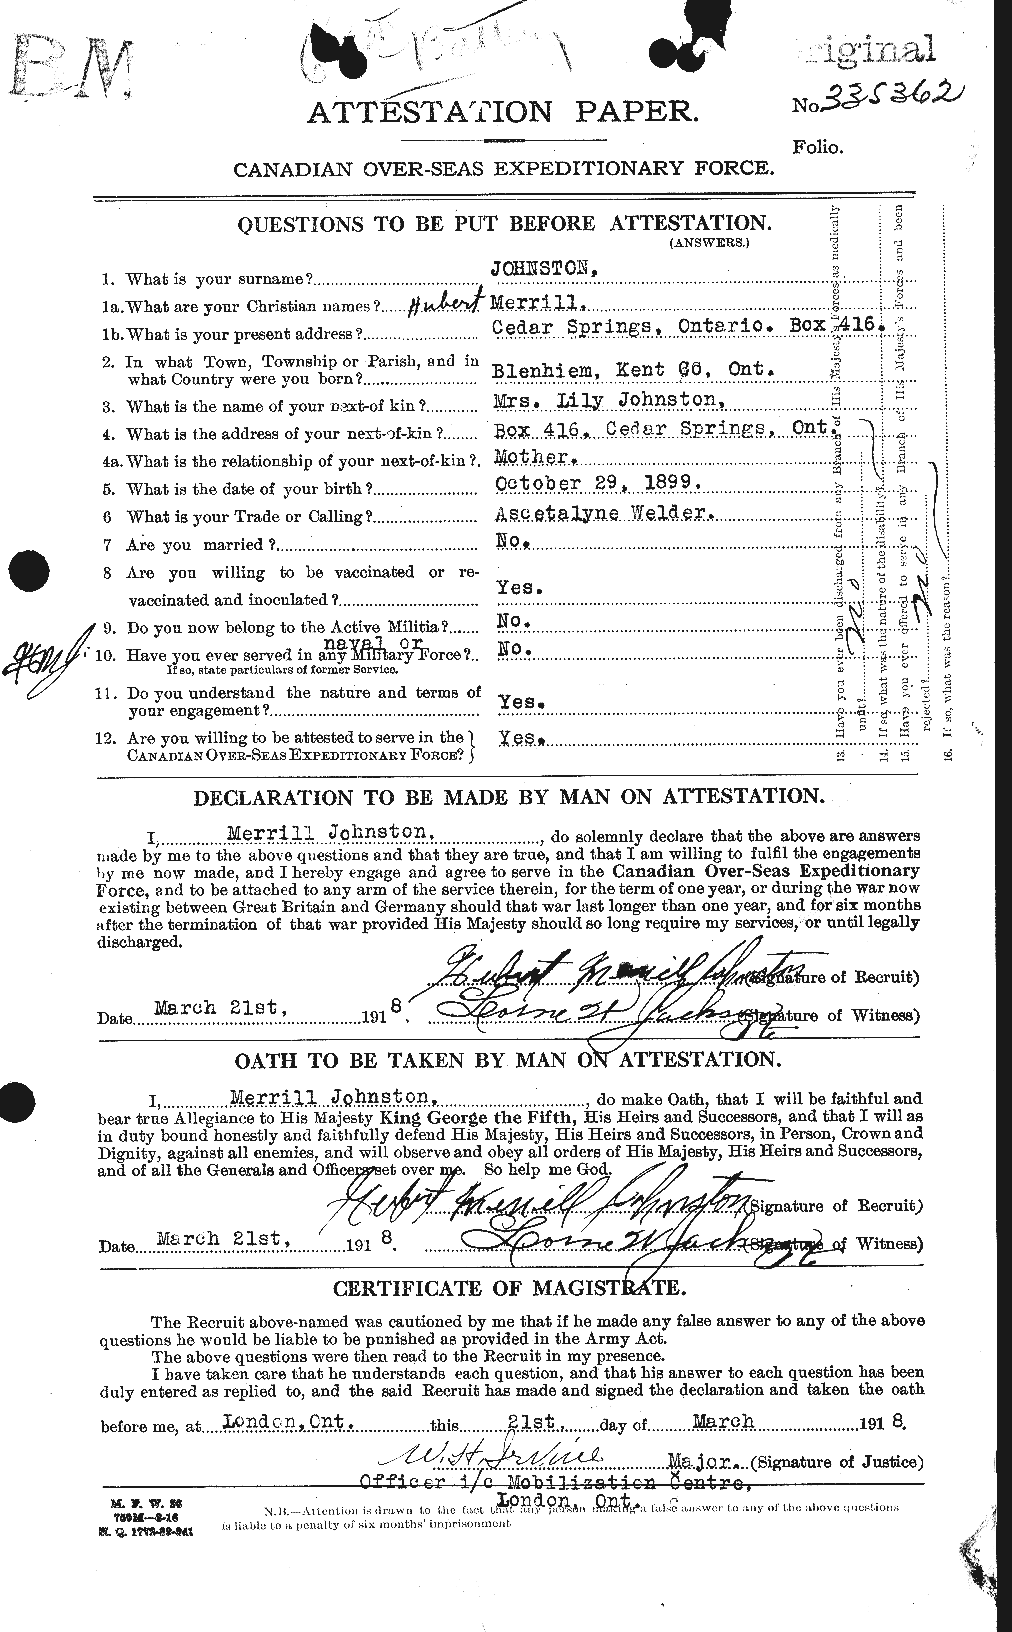 Personnel Records of the First World War - CEF 422658a